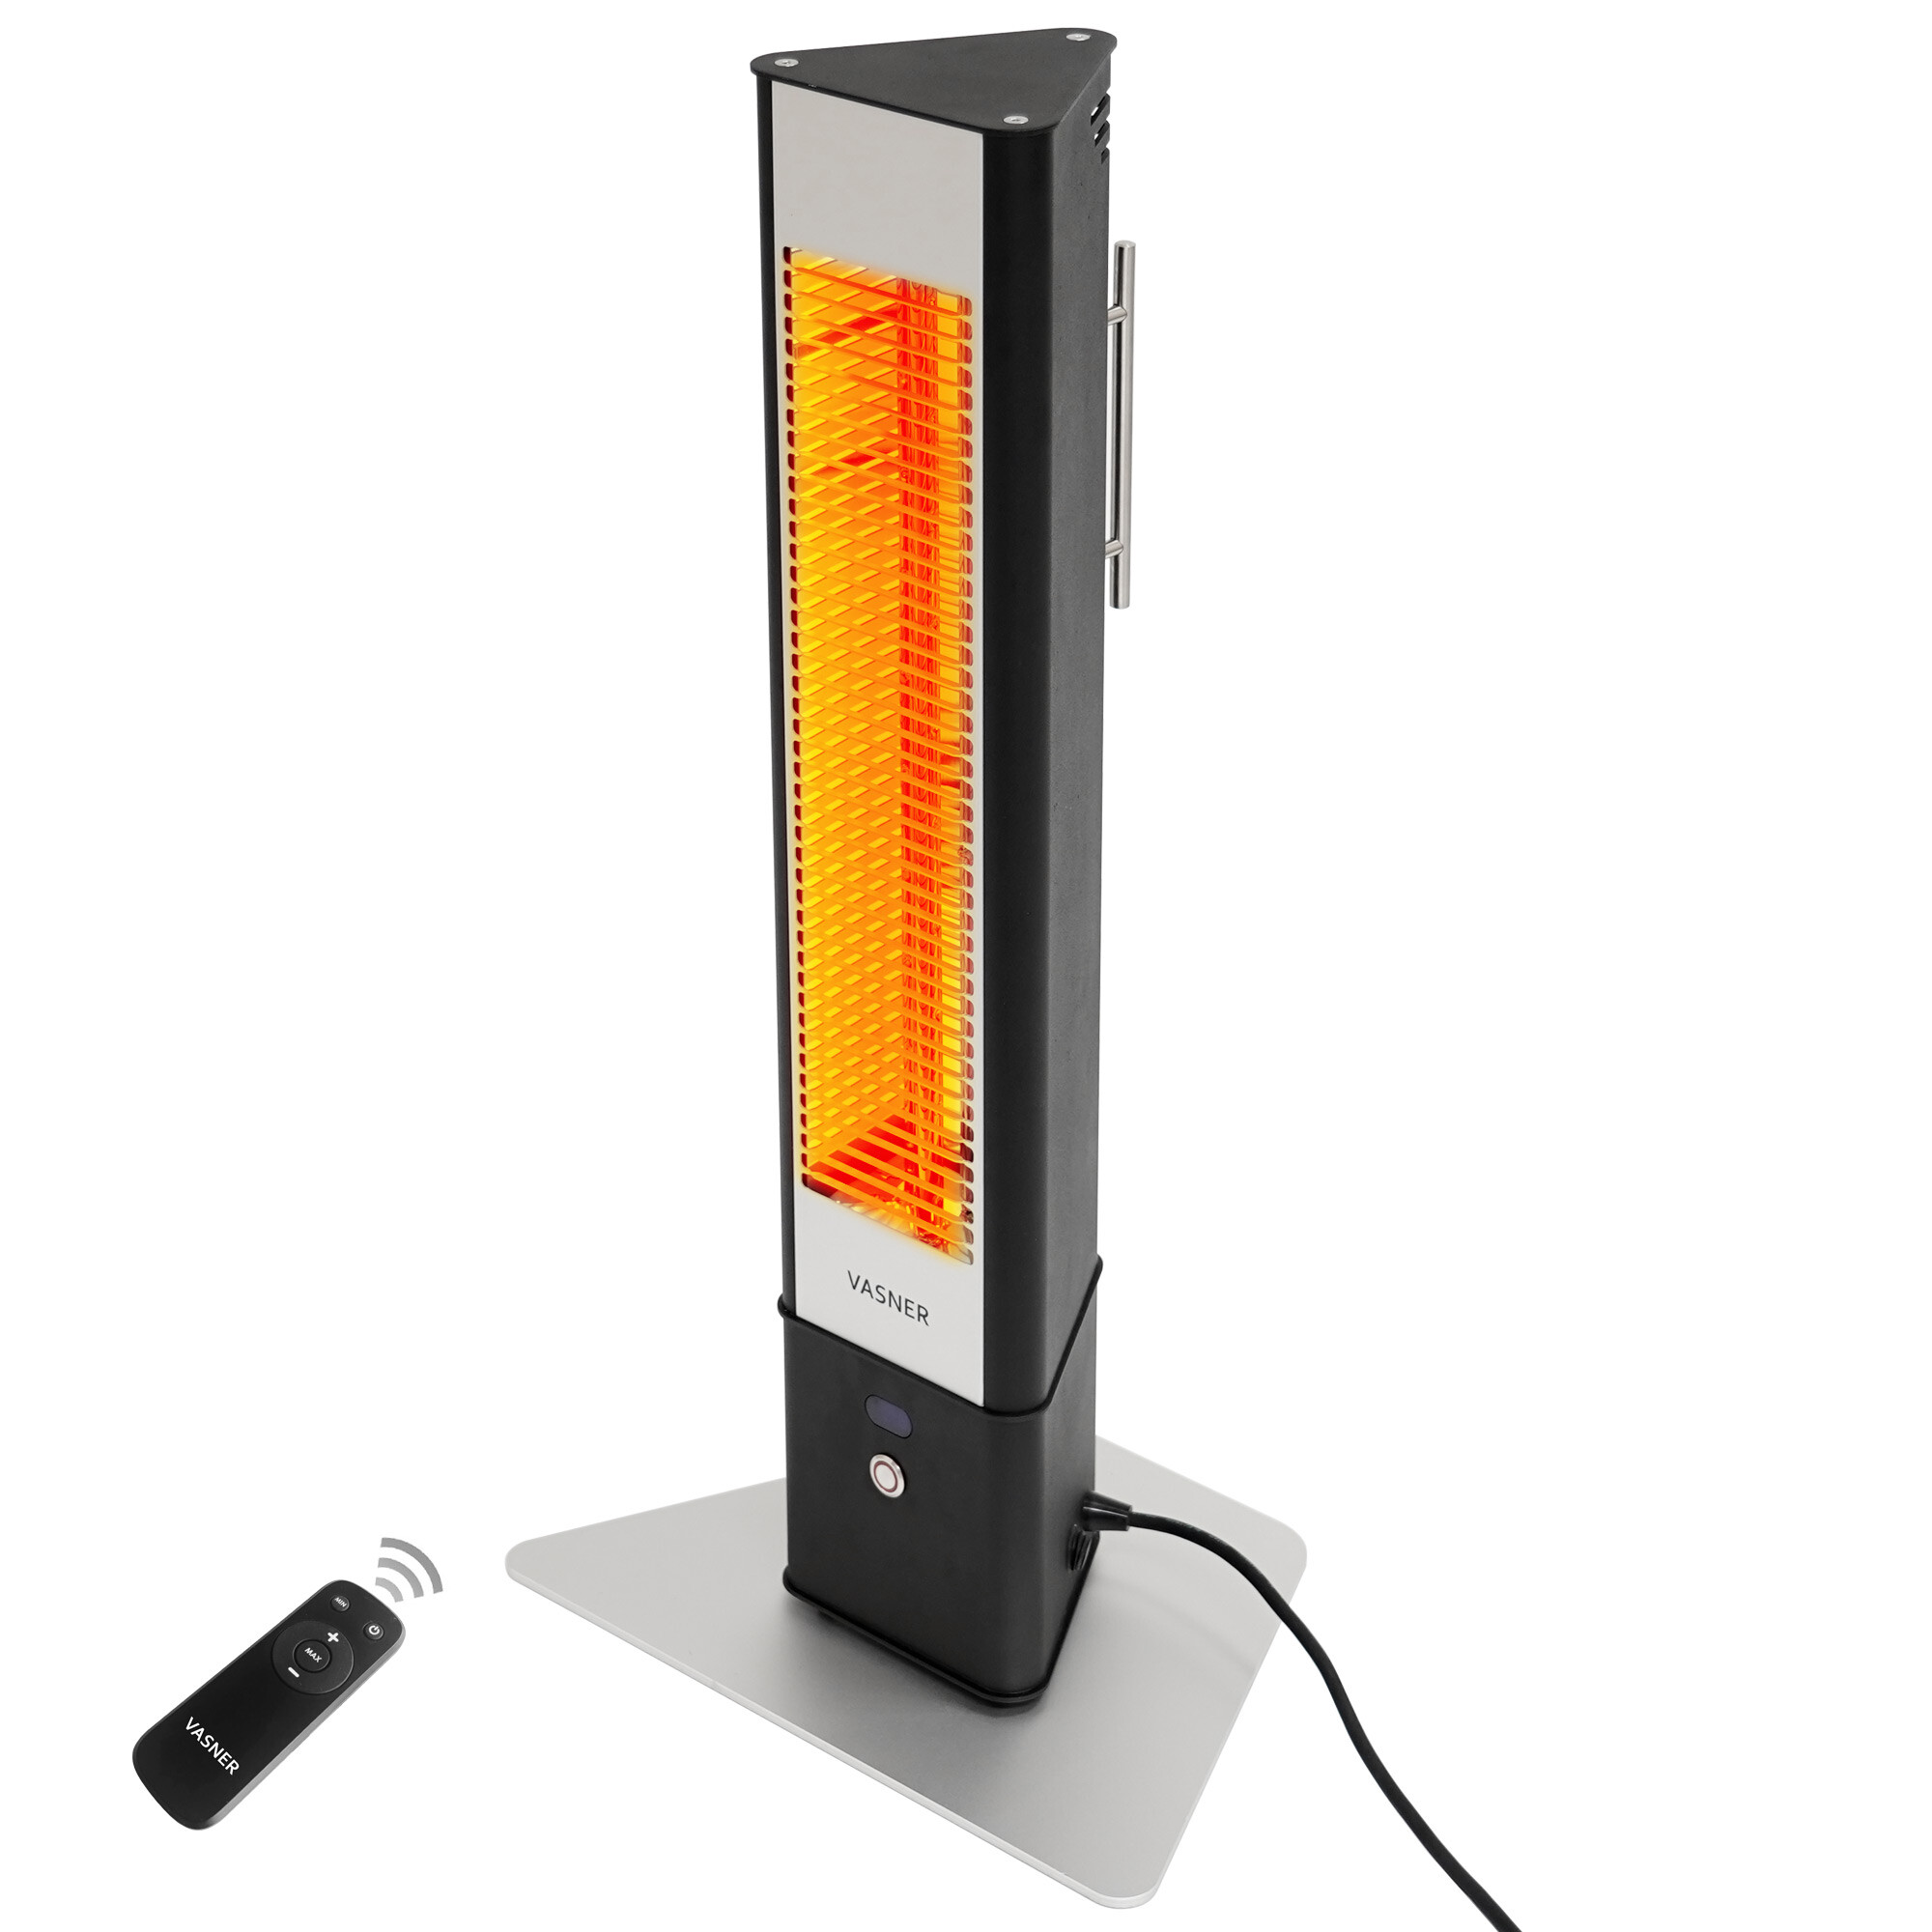 Portable outdoor heaters in black with 85% less light